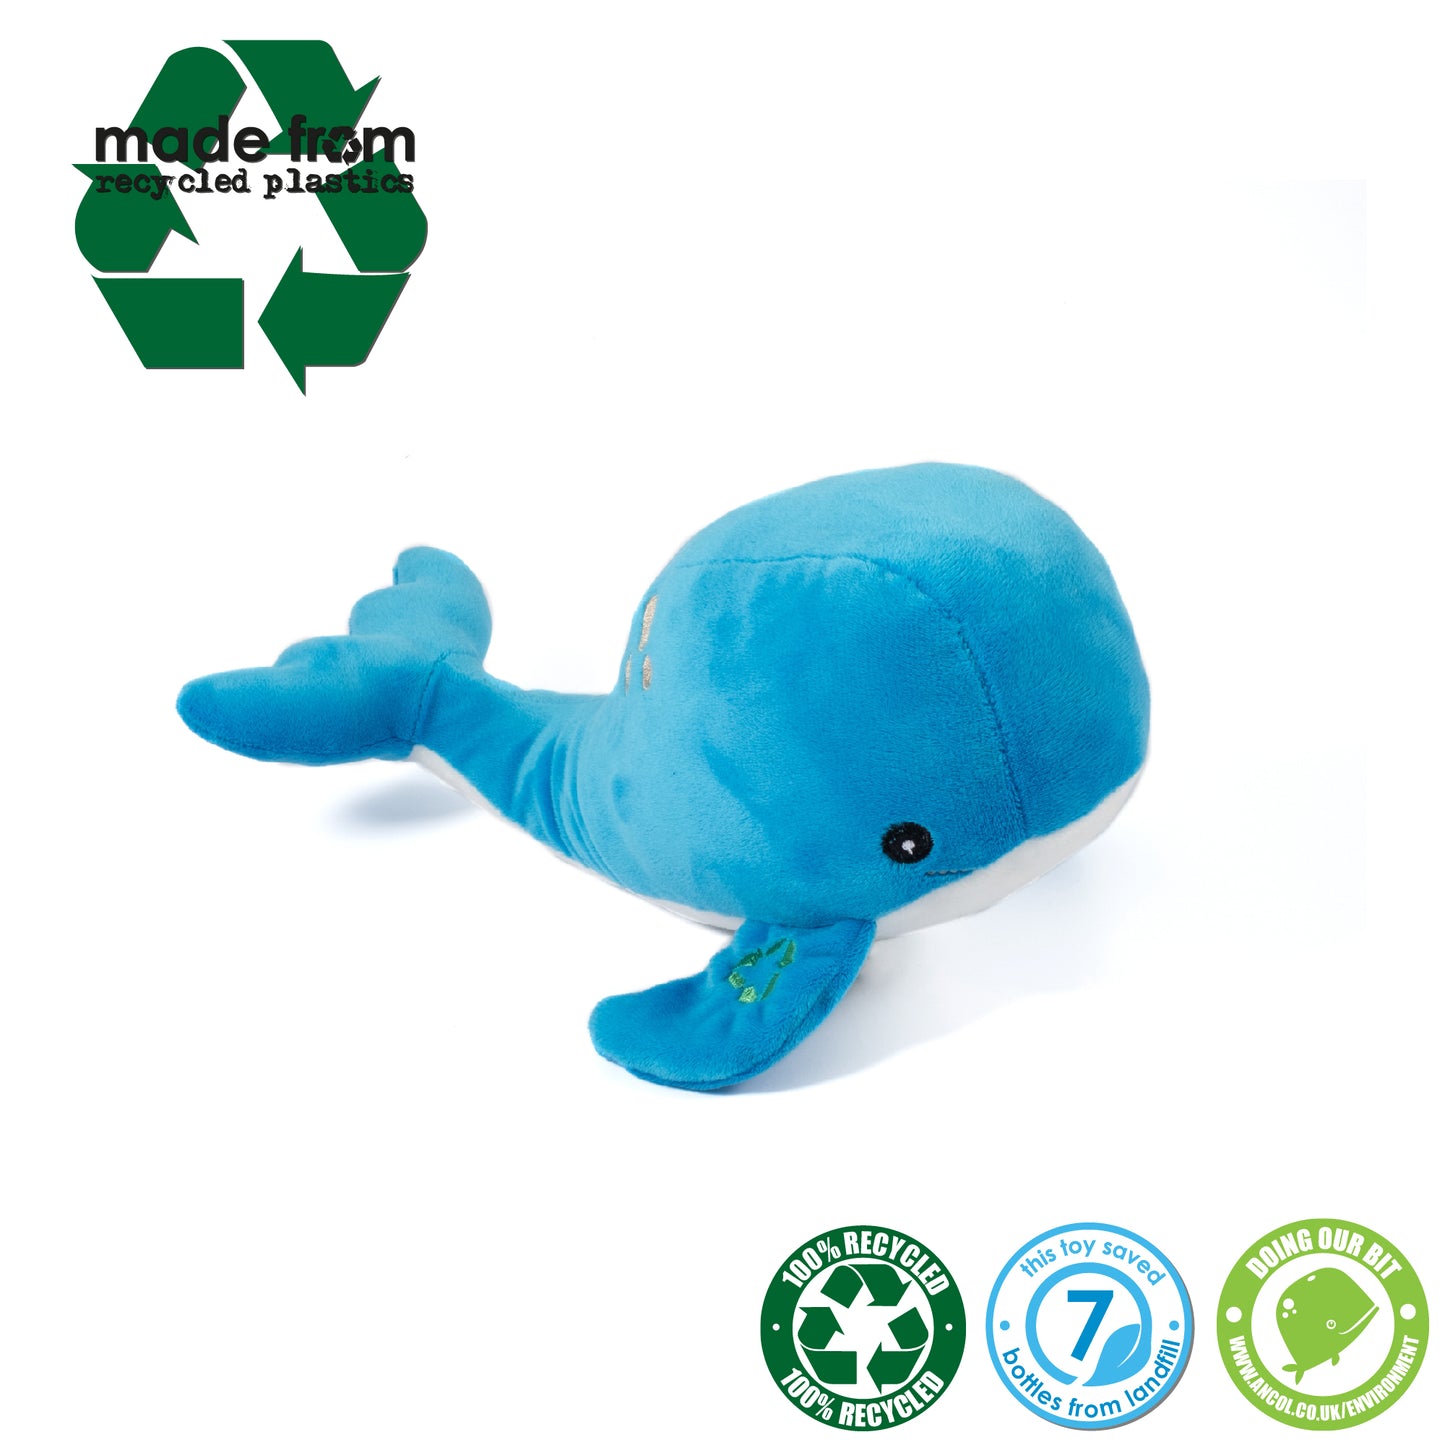 image shows a blue whale soft dog toy